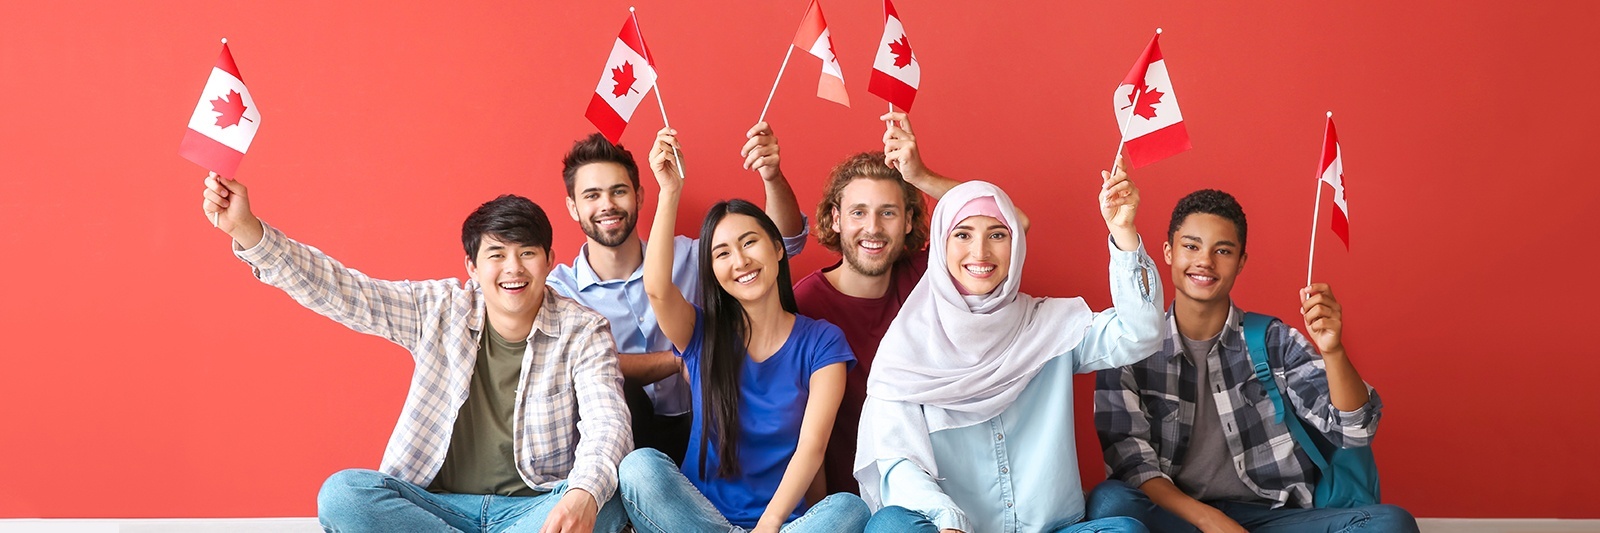 With a study permit for Canada, you can unlock exciting educational opportunities and broaden your horizons